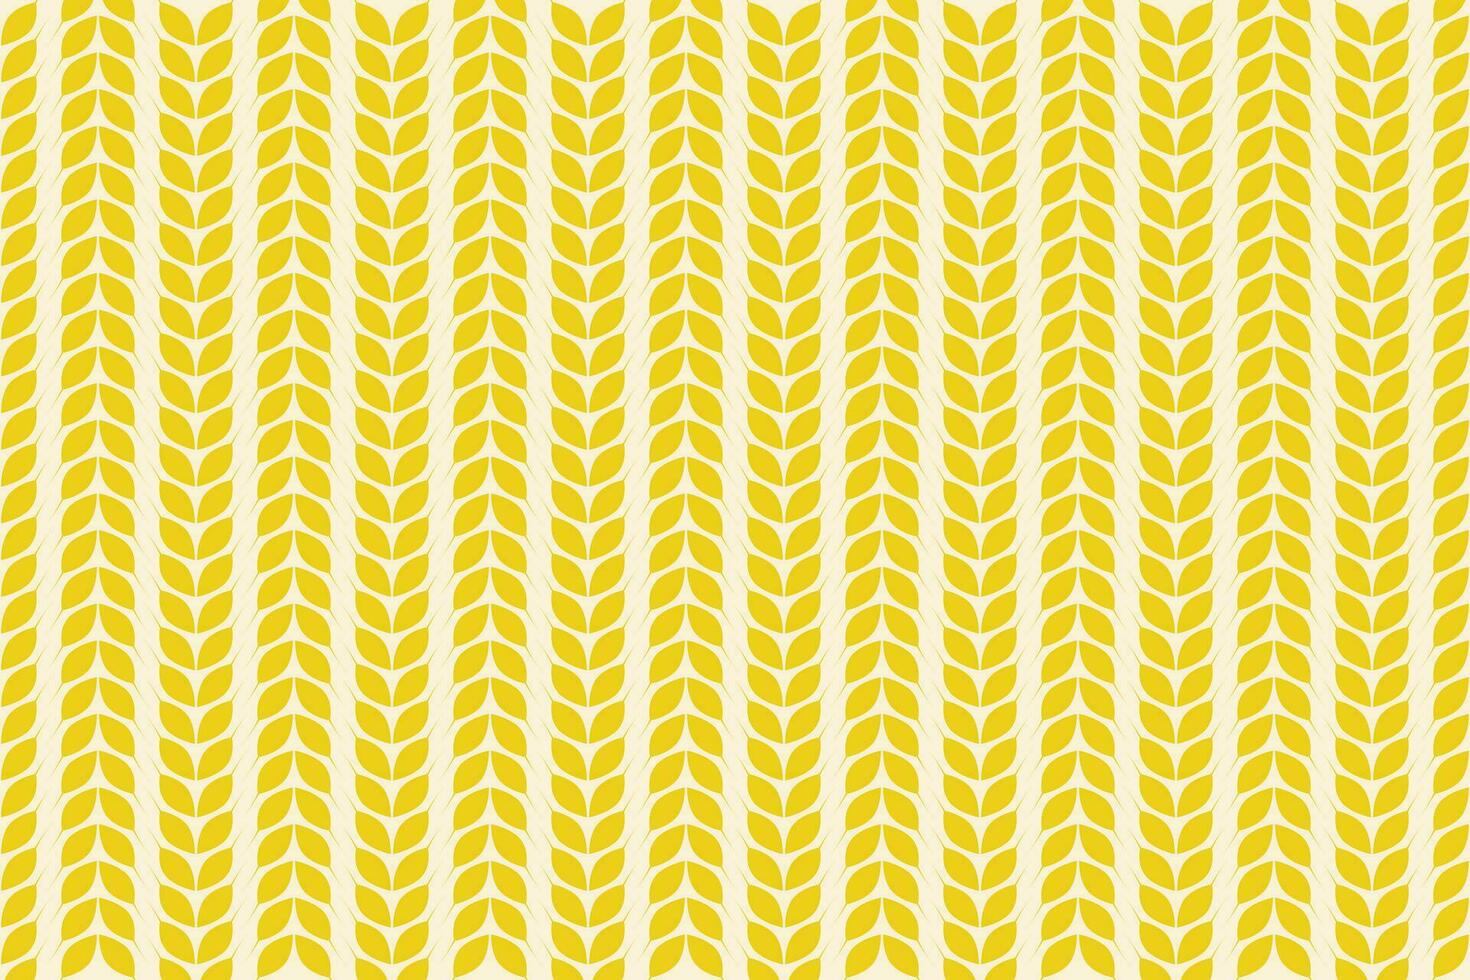 Vector pattern with ears of wheat for textiles or other industrial uses